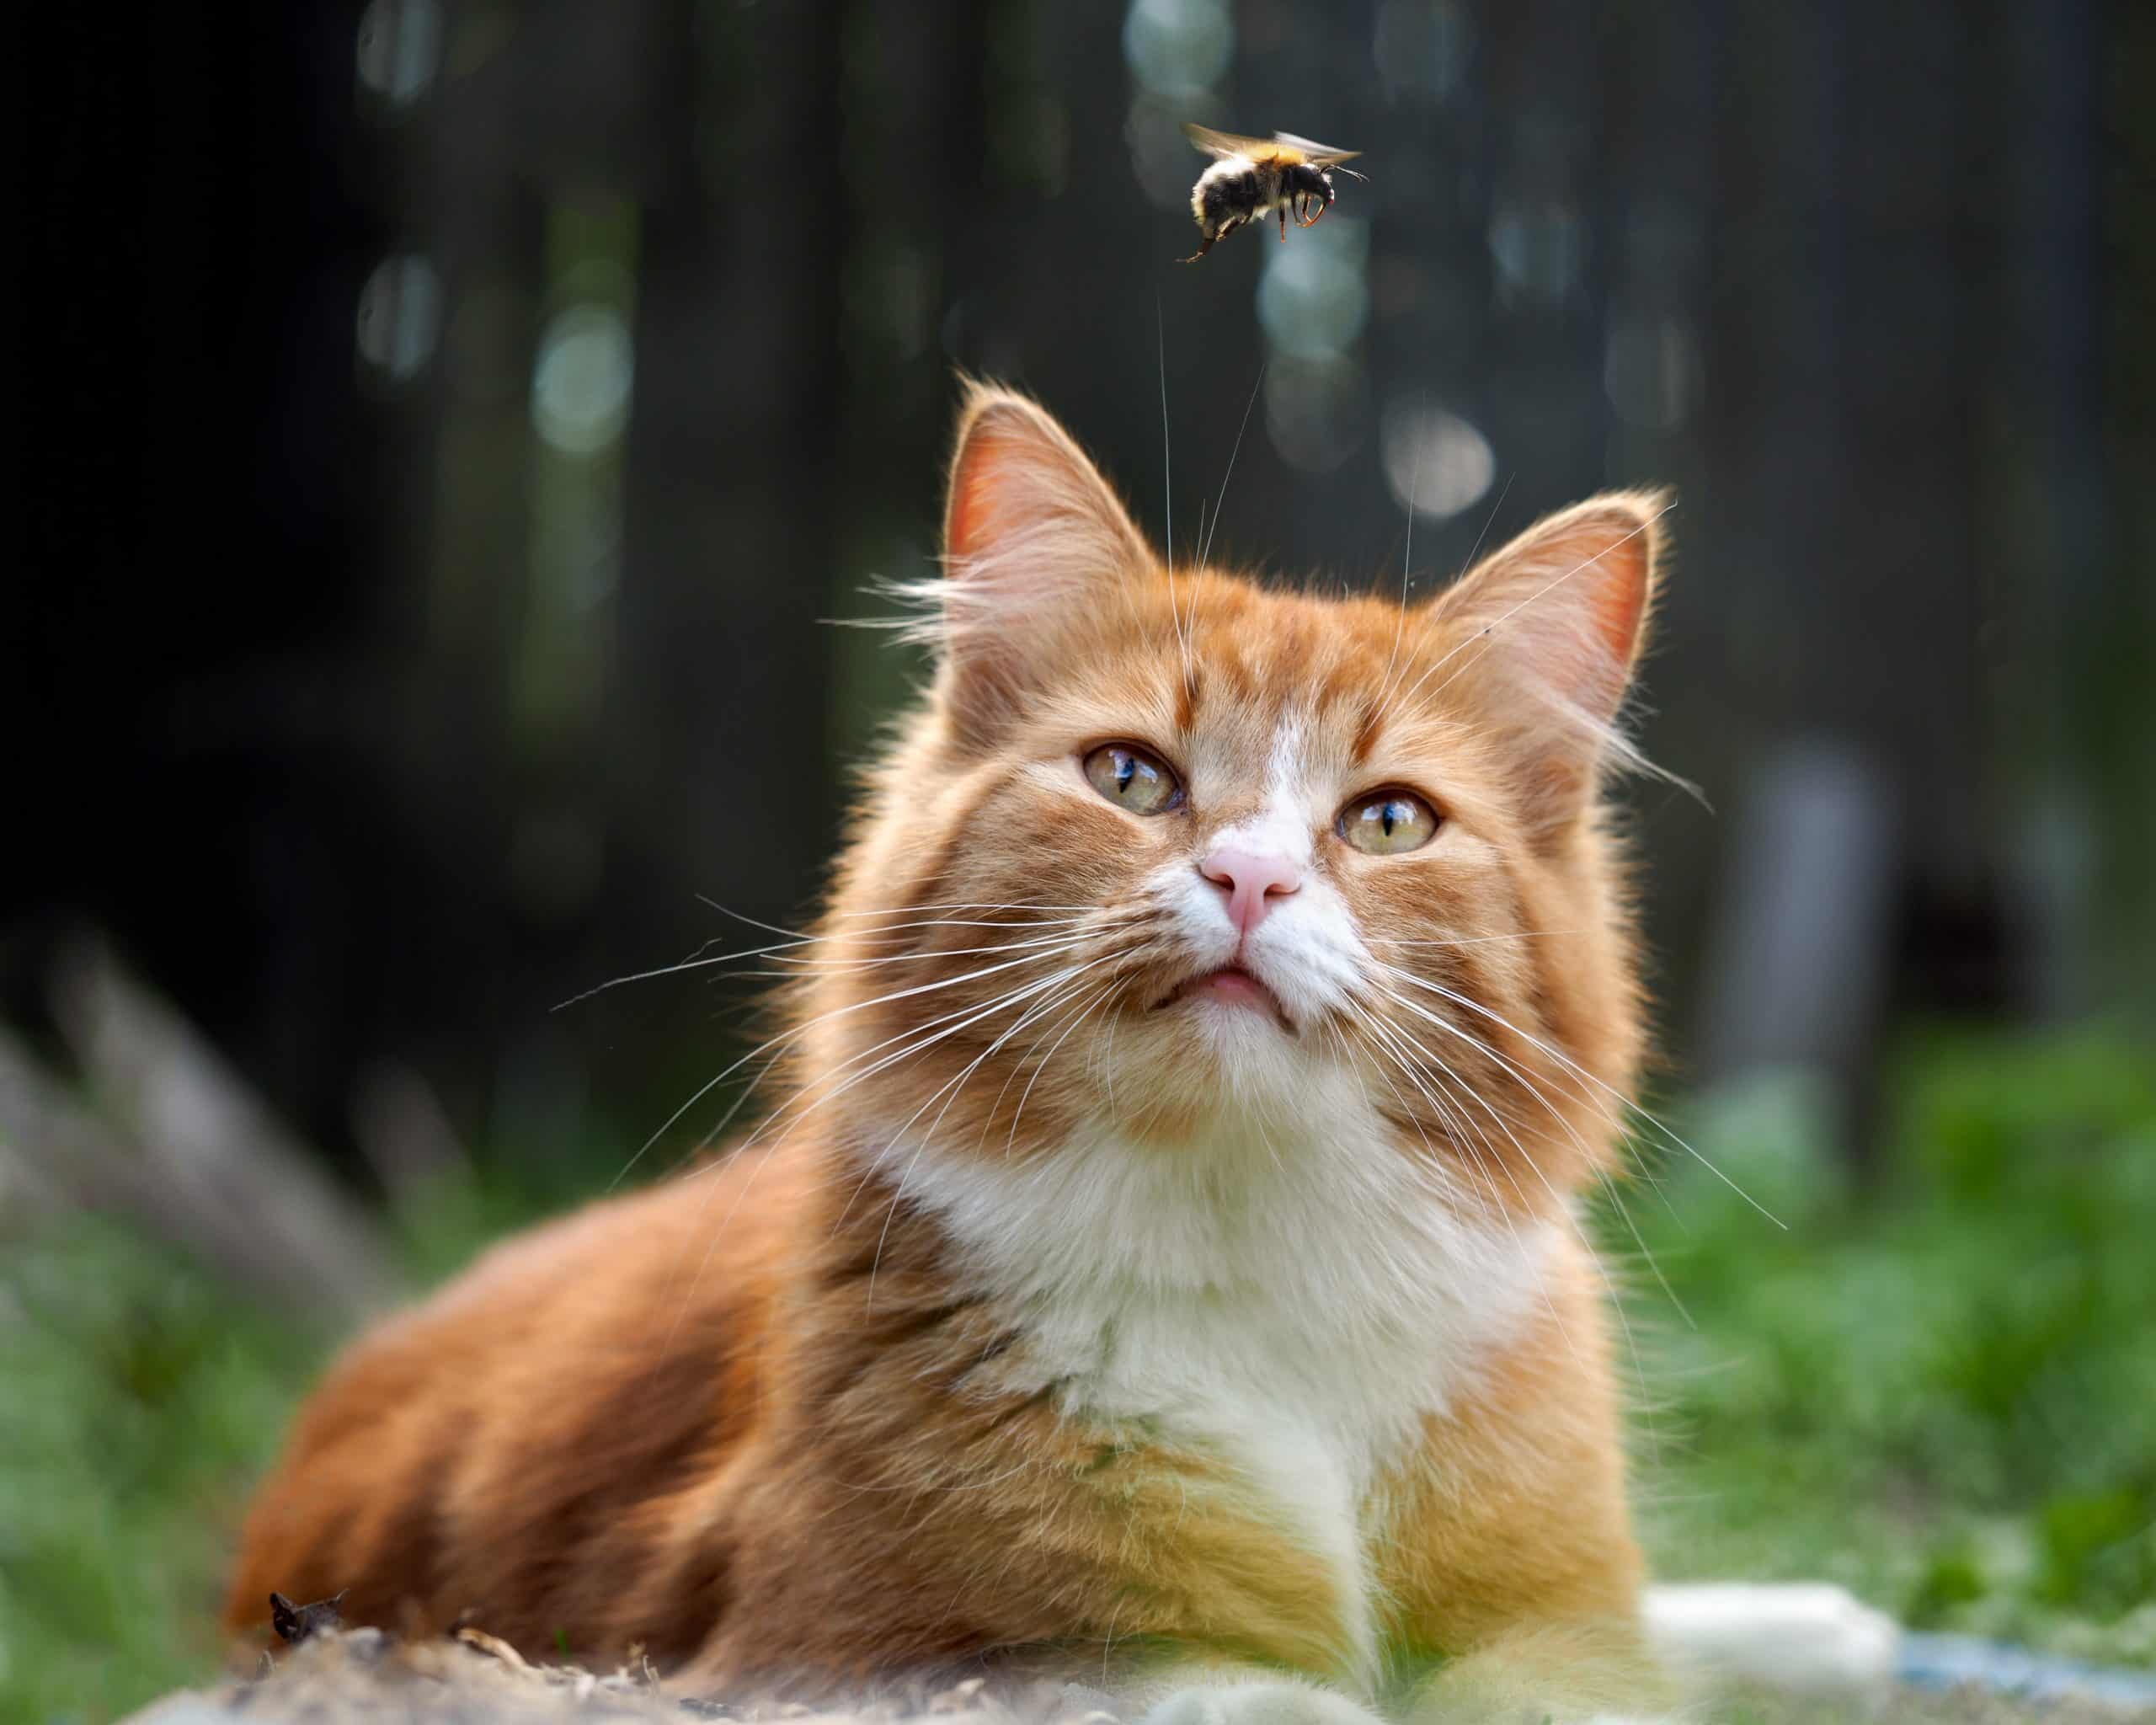 The cat is watching the flight of the bumblebee. Cat large, red and fluffy. Conceptually - animals outdoor recreation. Cat hunts for insects. Insect bites and allergies in animals